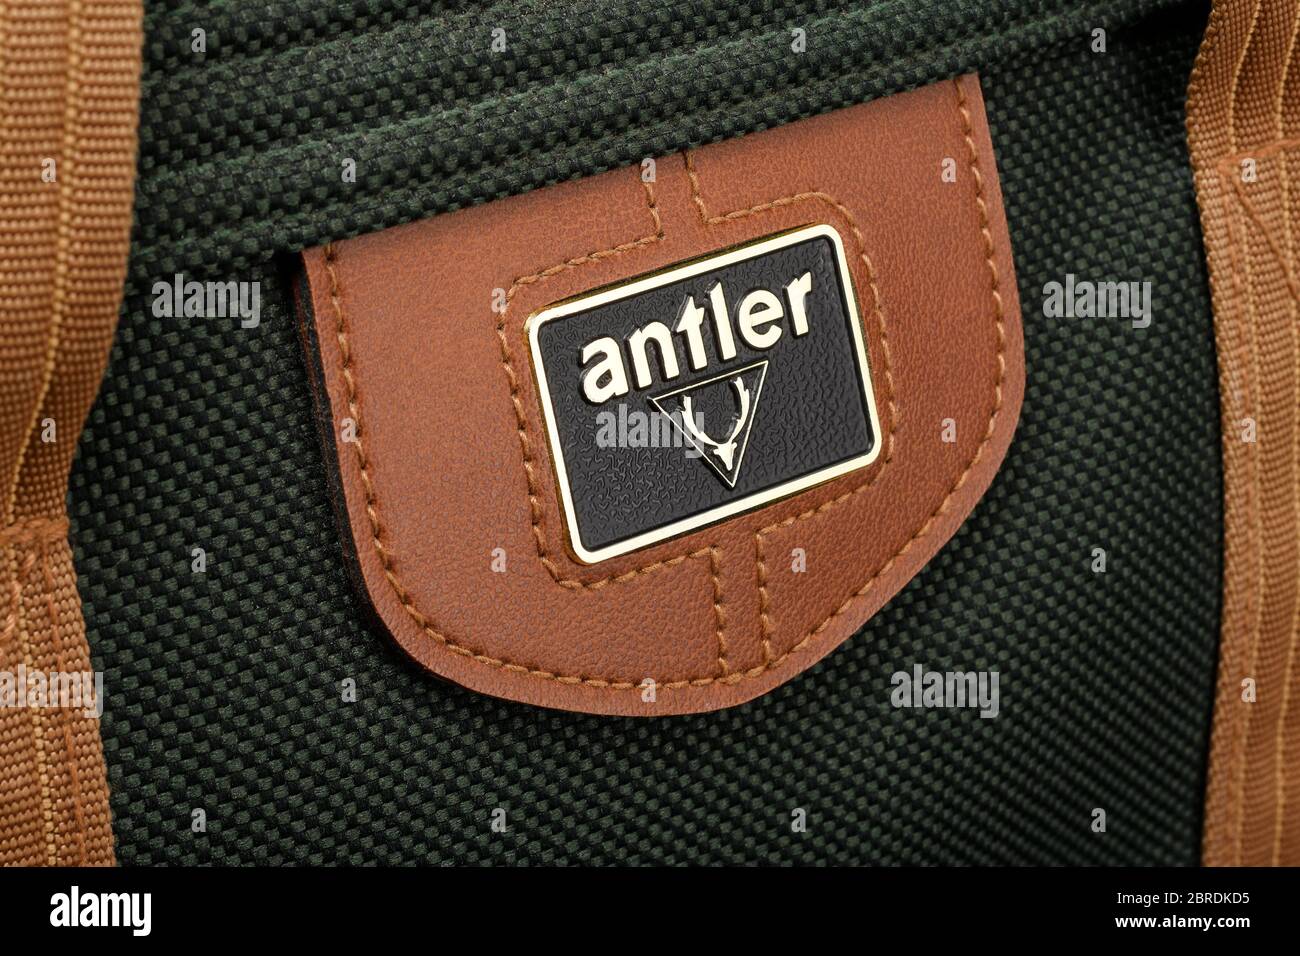 Close up detail of the Antler label and logo on a piece of luggage Stock Photo